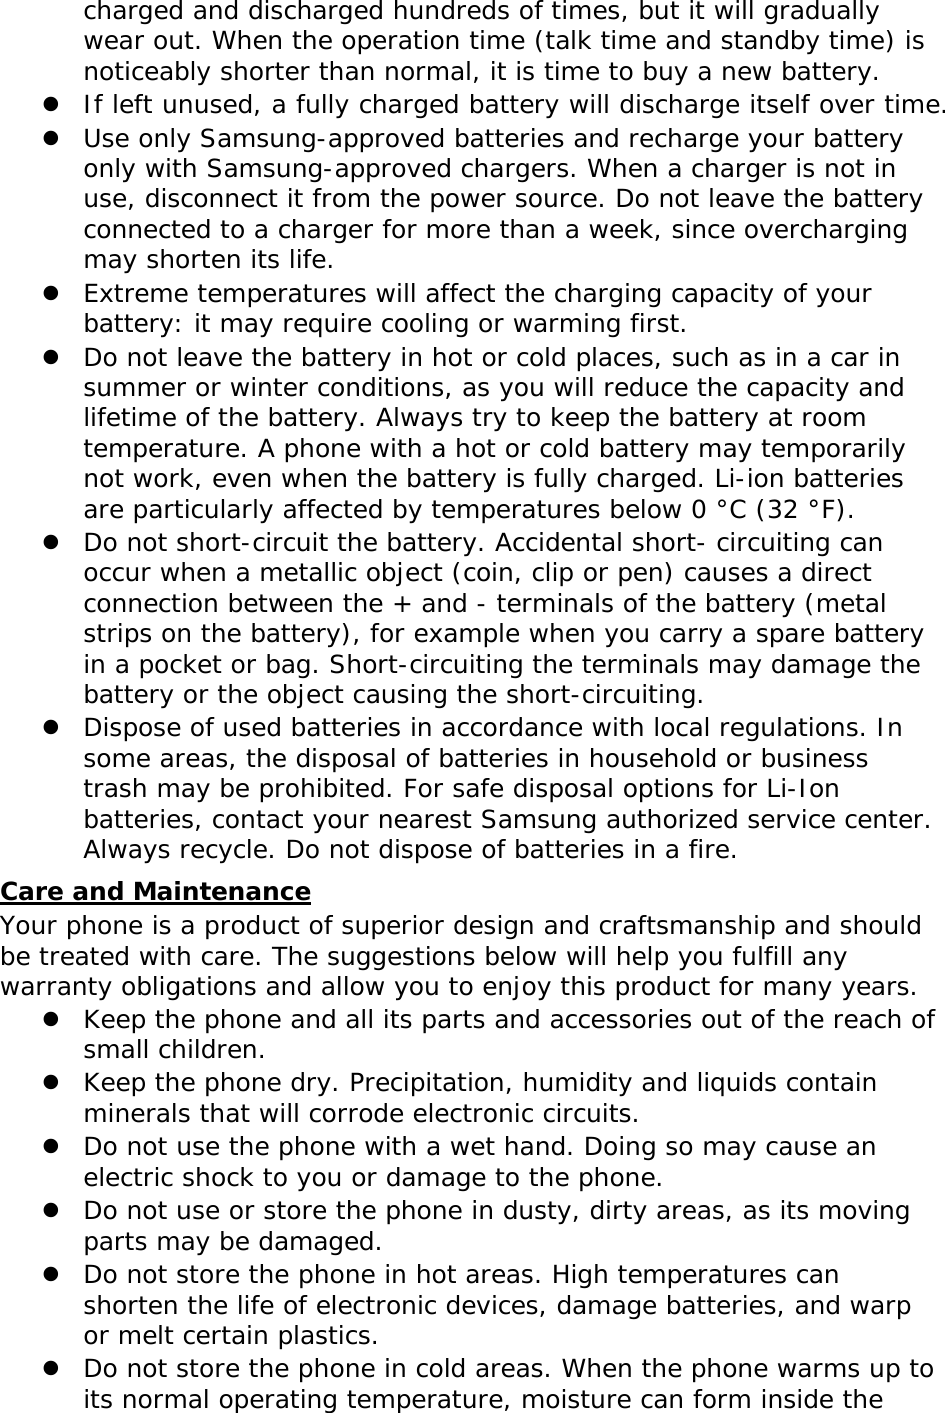 charged and discharged hundreds of times, but it will gradually wear out. When the operation time (talk time and standby time) is noticeably shorter than normal, it is time to buy a new battery.  If left unused, a fully charged battery will discharge itself over time.  Use only Samsung-approved batteries and recharge your battery only with Samsung-approved chargers. When a charger is not in use, disconnect it from the power source. Do not leave the battery connected to a charger for more than a week, since overcharging may shorten its life.  Extreme temperatures will affect the charging capacity of your battery: it may require cooling or warming first.  Do not leave the battery in hot or cold places, such as in a car in summer or winter conditions, as you will reduce the capacity and lifetime of the battery. Always try to keep the battery at room temperature. A phone with a hot or cold battery may temporarily not work, even when the battery is fully charged. Li-ion batteries are particularly affected by temperatures below 0 °C (32 °F).  Do not short-circuit the battery. Accidental short- circuiting can occur when a metallic object (coin, clip or pen) causes a direct connection between the + and - terminals of the battery (metal strips on the battery), for example when you carry a spare battery in a pocket or bag. Short-circuiting the terminals may damage the battery or the object causing the short-circuiting.  Dispose of used batteries in accordance with local regulations. In some areas, the disposal of batteries in household or business trash may be prohibited. For safe disposal options for Li-Ion batteries, contact your nearest Samsung authorized service center. Always recycle. Do not dispose of batteries in a fire. UCare and Maintenance Your phone is a product of superior design and craftsmanship and should be treated with care. The suggestions below will help you fulfill any warranty obligations and allow you to enjoy this product for many years.  Keep the phone and all its parts and accessories out of the reach of small children.  Keep the phone dry. Precipitation, humidity and liquids contain minerals that will corrode electronic circuits.  Do not use the phone with a wet hand. Doing so may cause an electric shock to you or damage to the phone.  Do not use or store the phone in dusty, dirty areas, as its moving parts may be damaged.  Do not store the phone in hot areas. High temperatures can shorten the life of electronic devices, damage batteries, and warp or melt certain plastics.  Do not store the phone in cold areas. When the phone warms up to its normal operating temperature, moisture can form inside the 